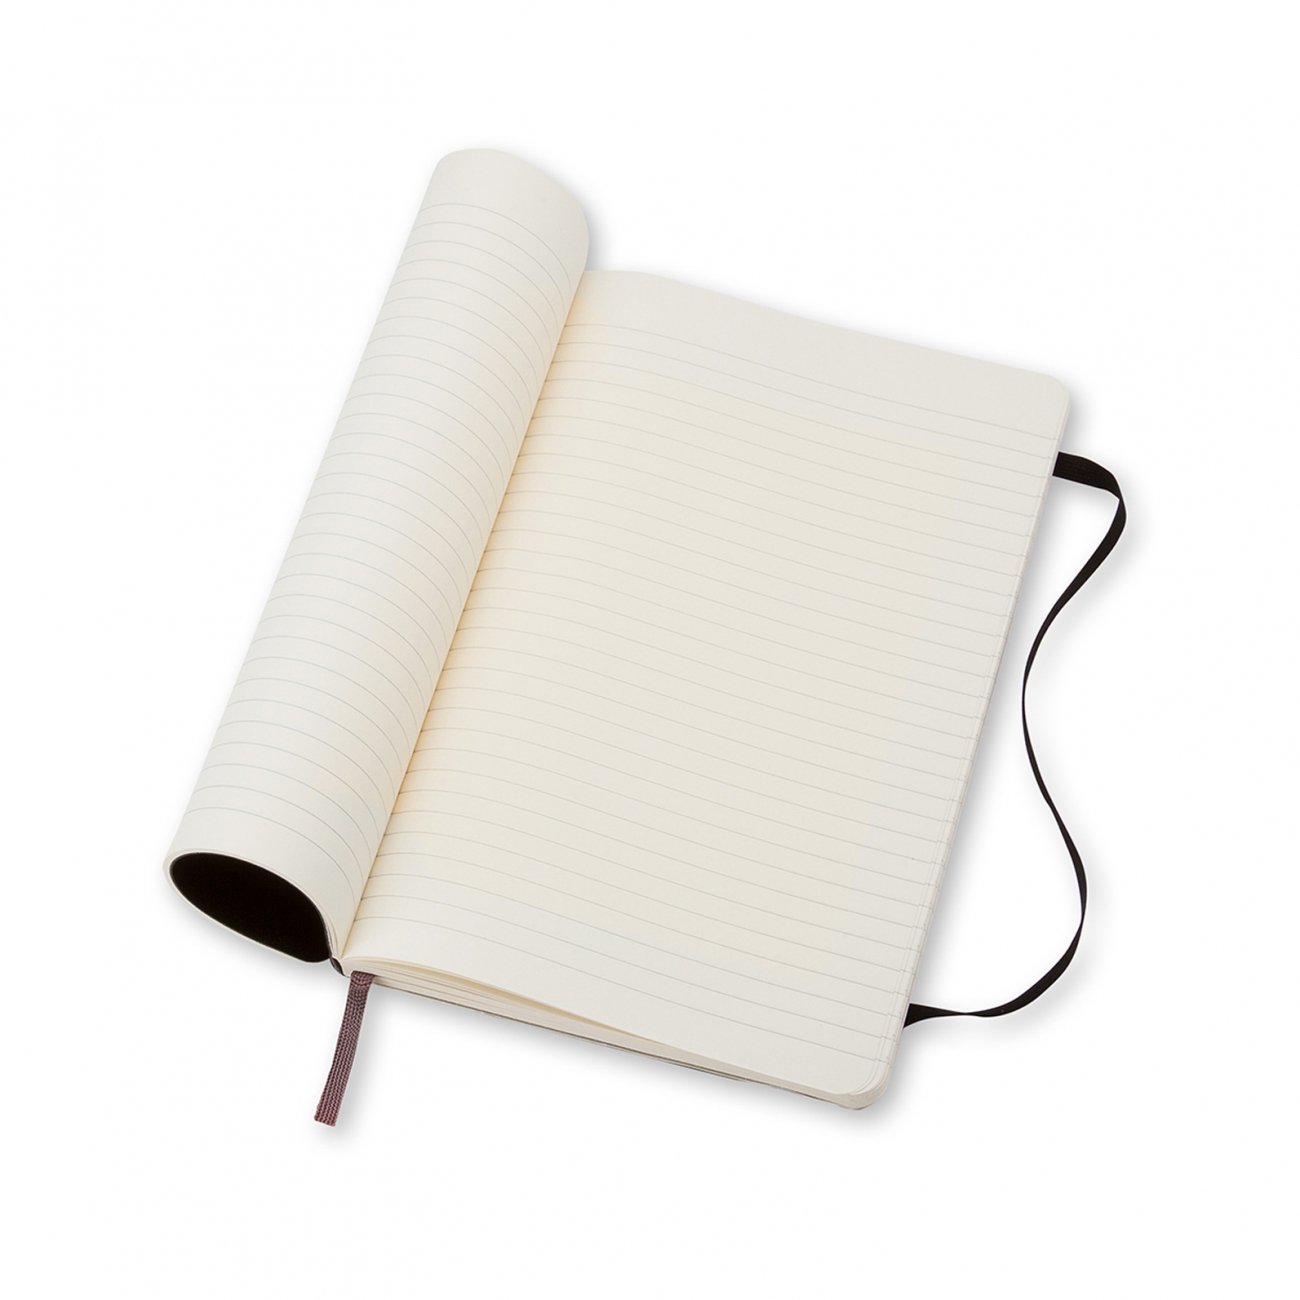 CLASSIC SOFT COVER NOTEBOOK - RULED - LARGE - BLACK